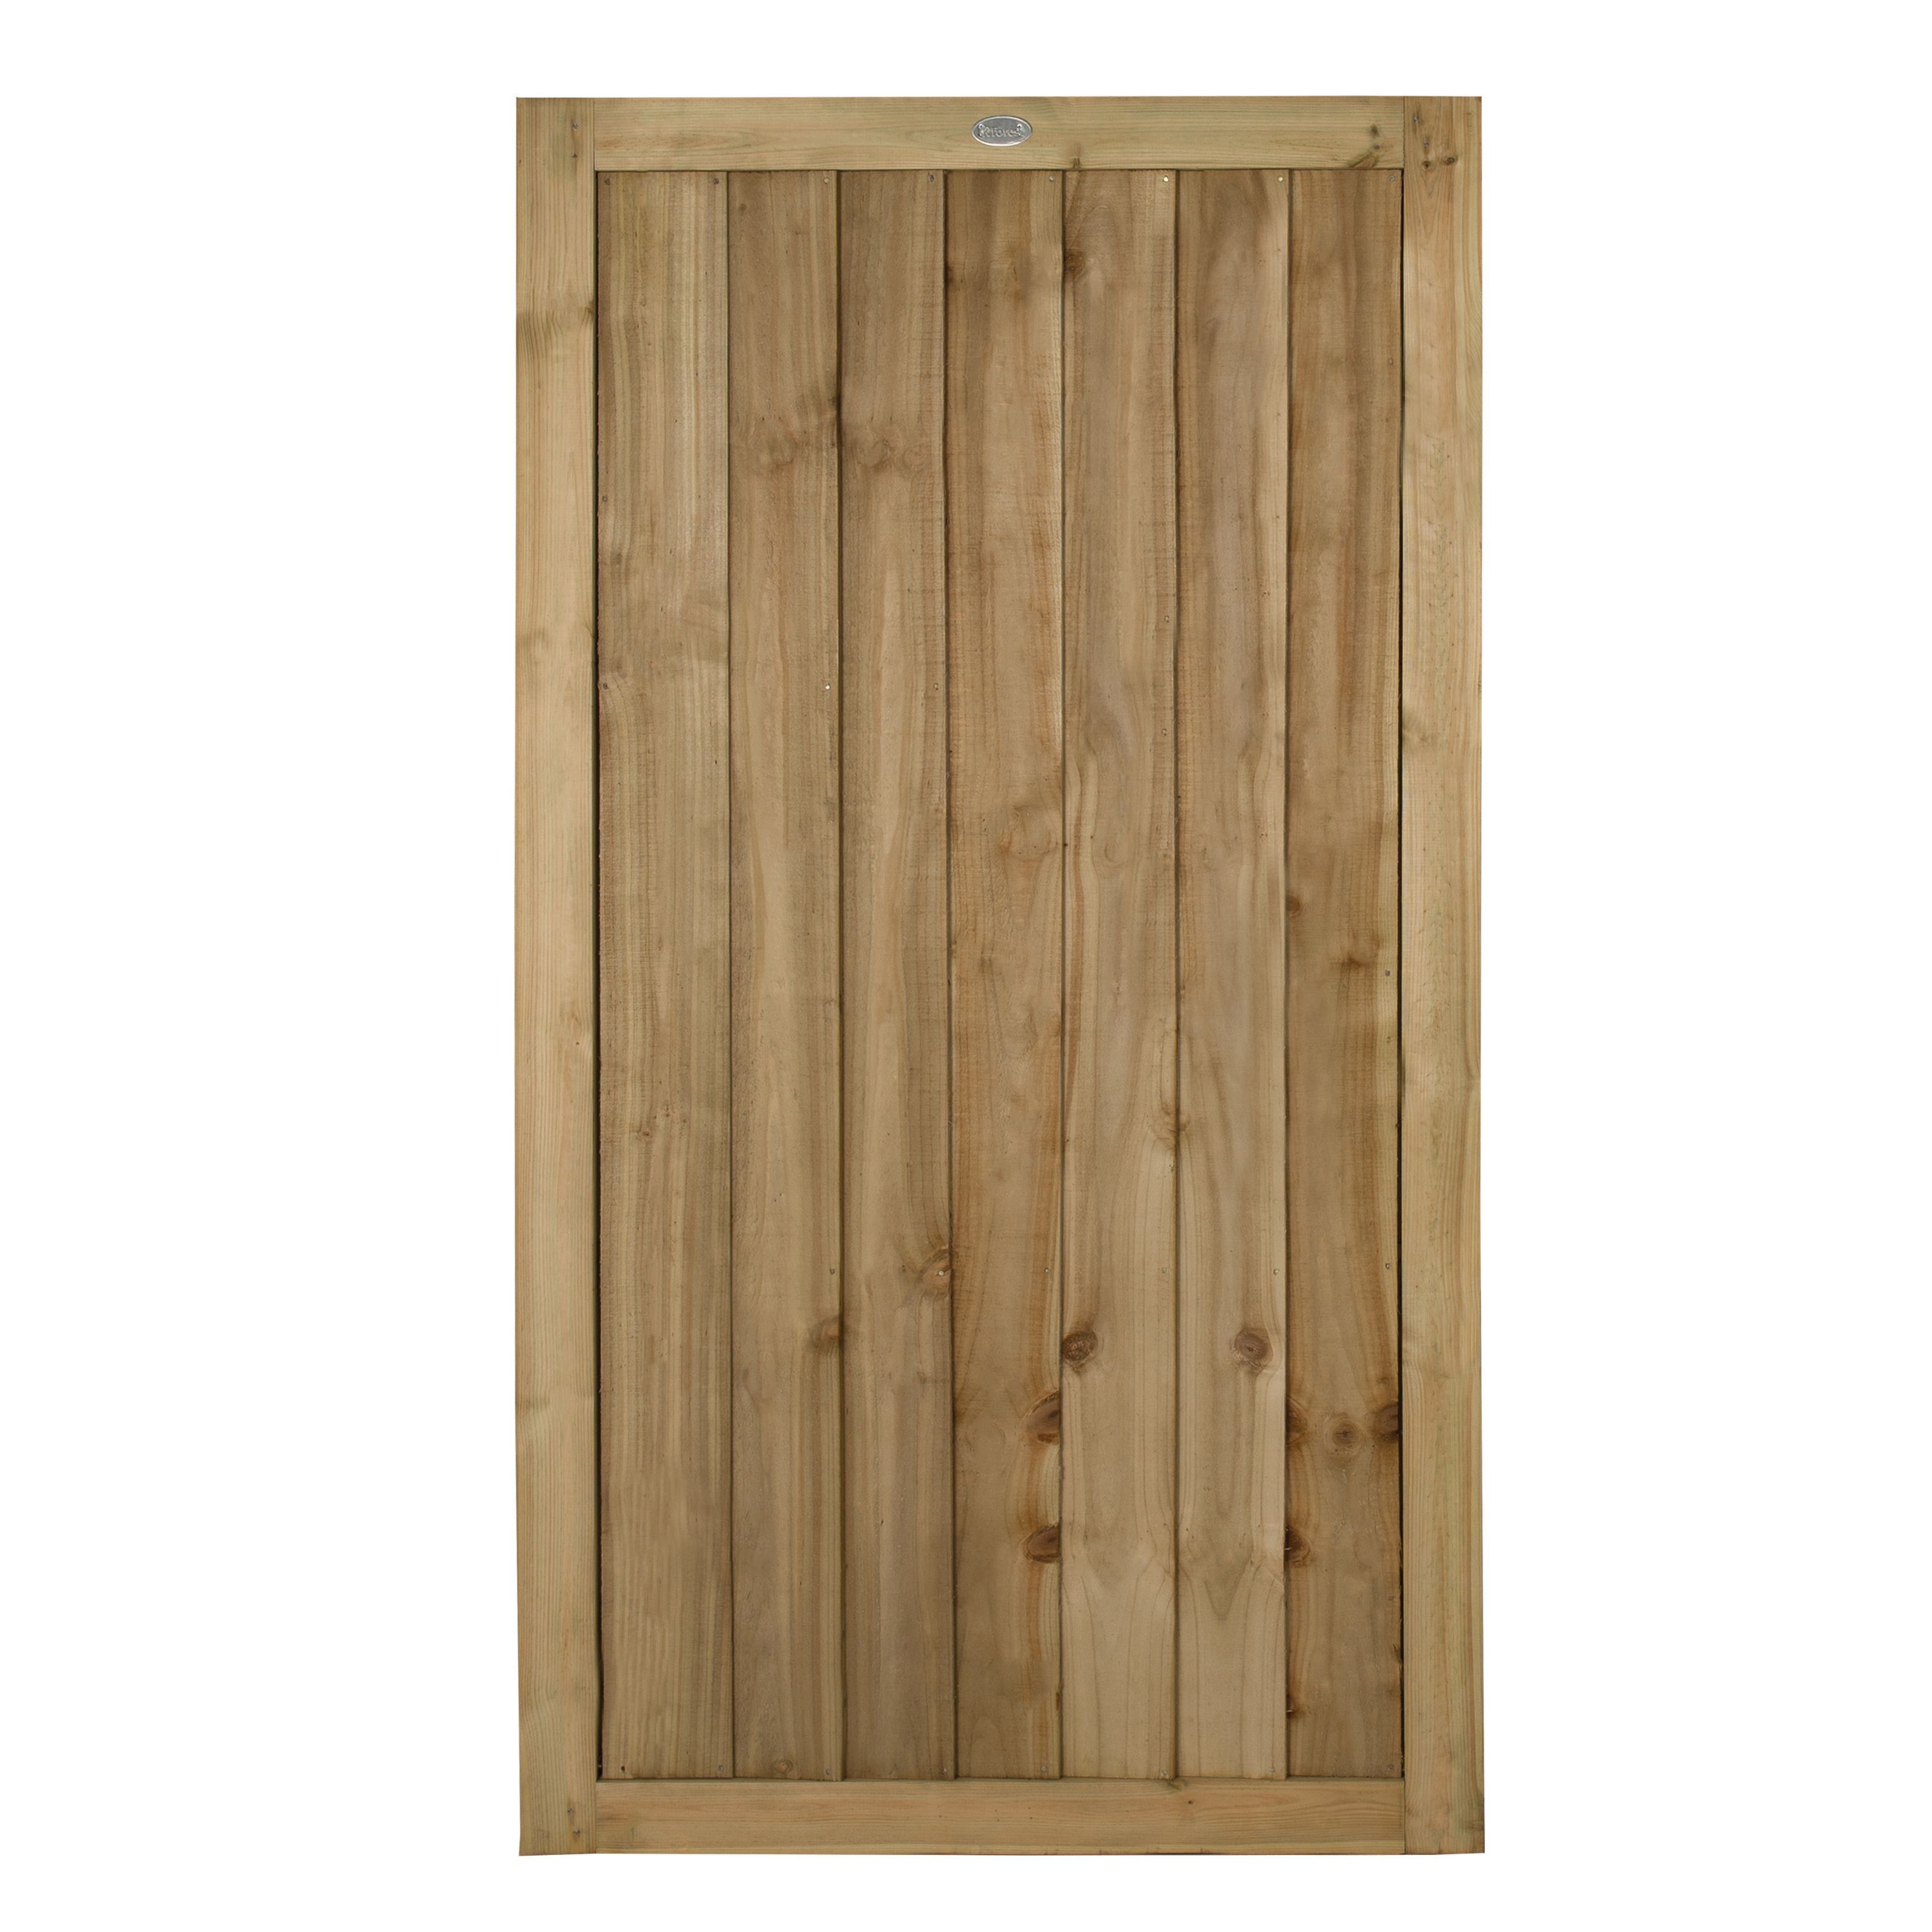 Image of Wickes Featheredge Gate - 920 x 1800mm